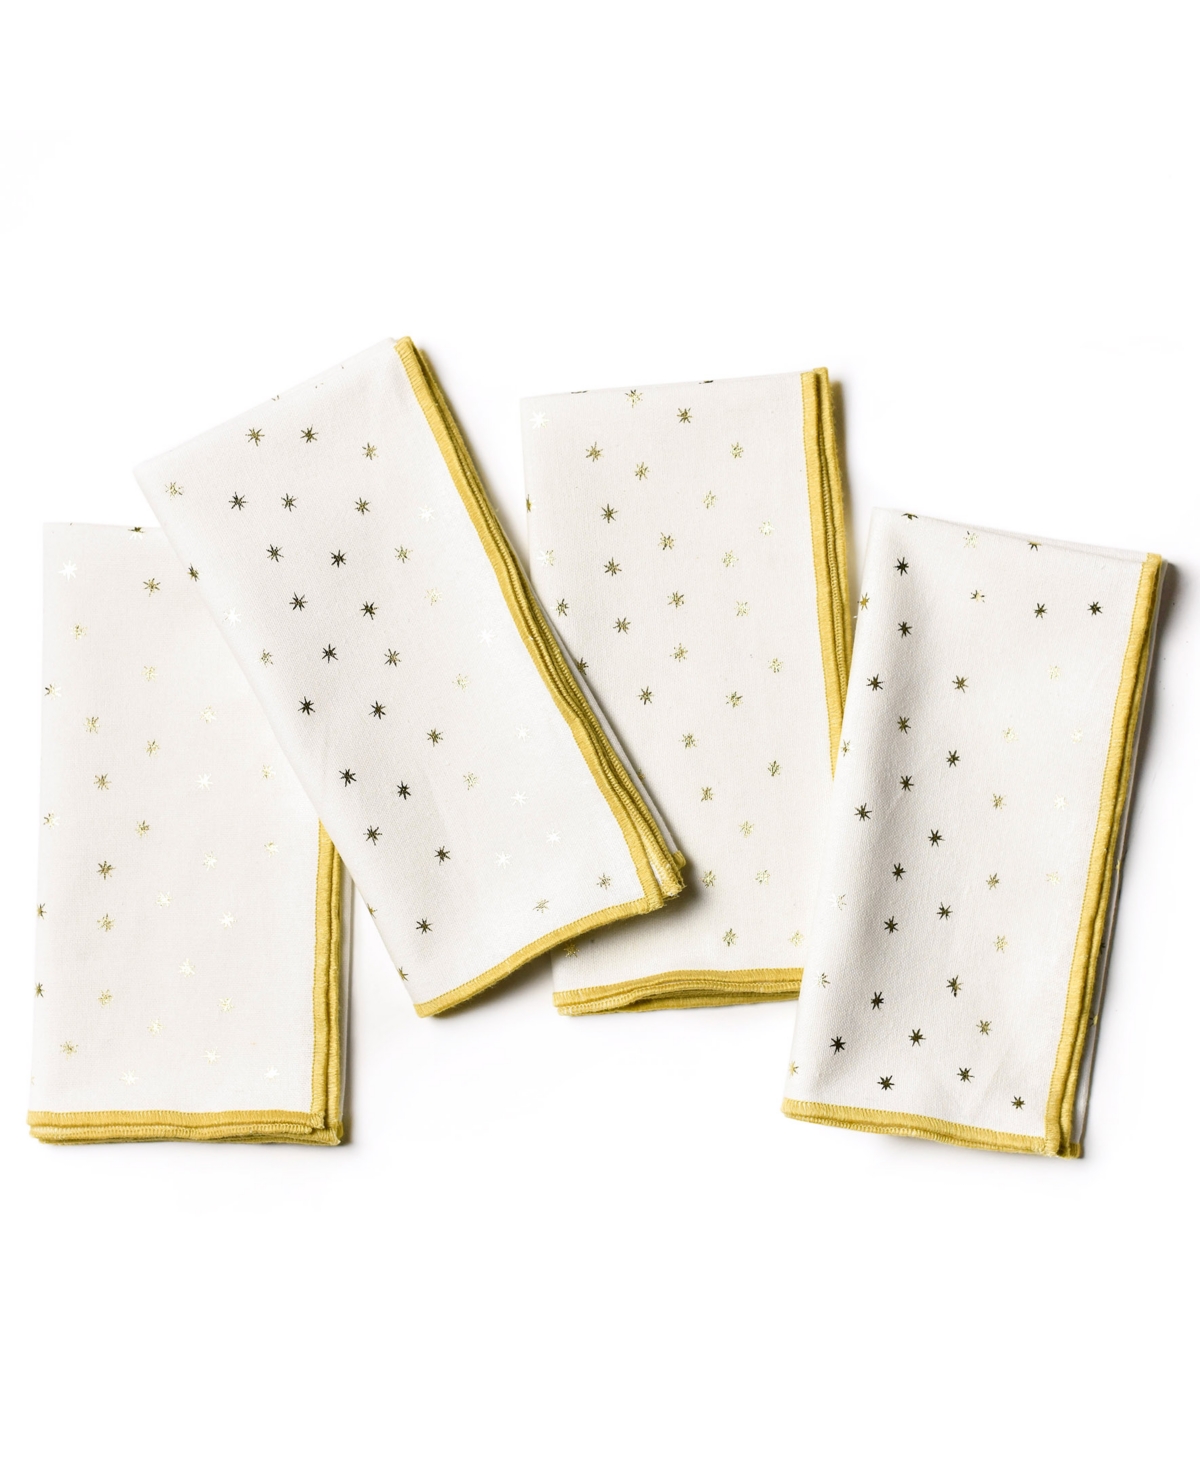 Coton Colors By Laura Johnson Gold Star Napkin Set/4 In White And Gold